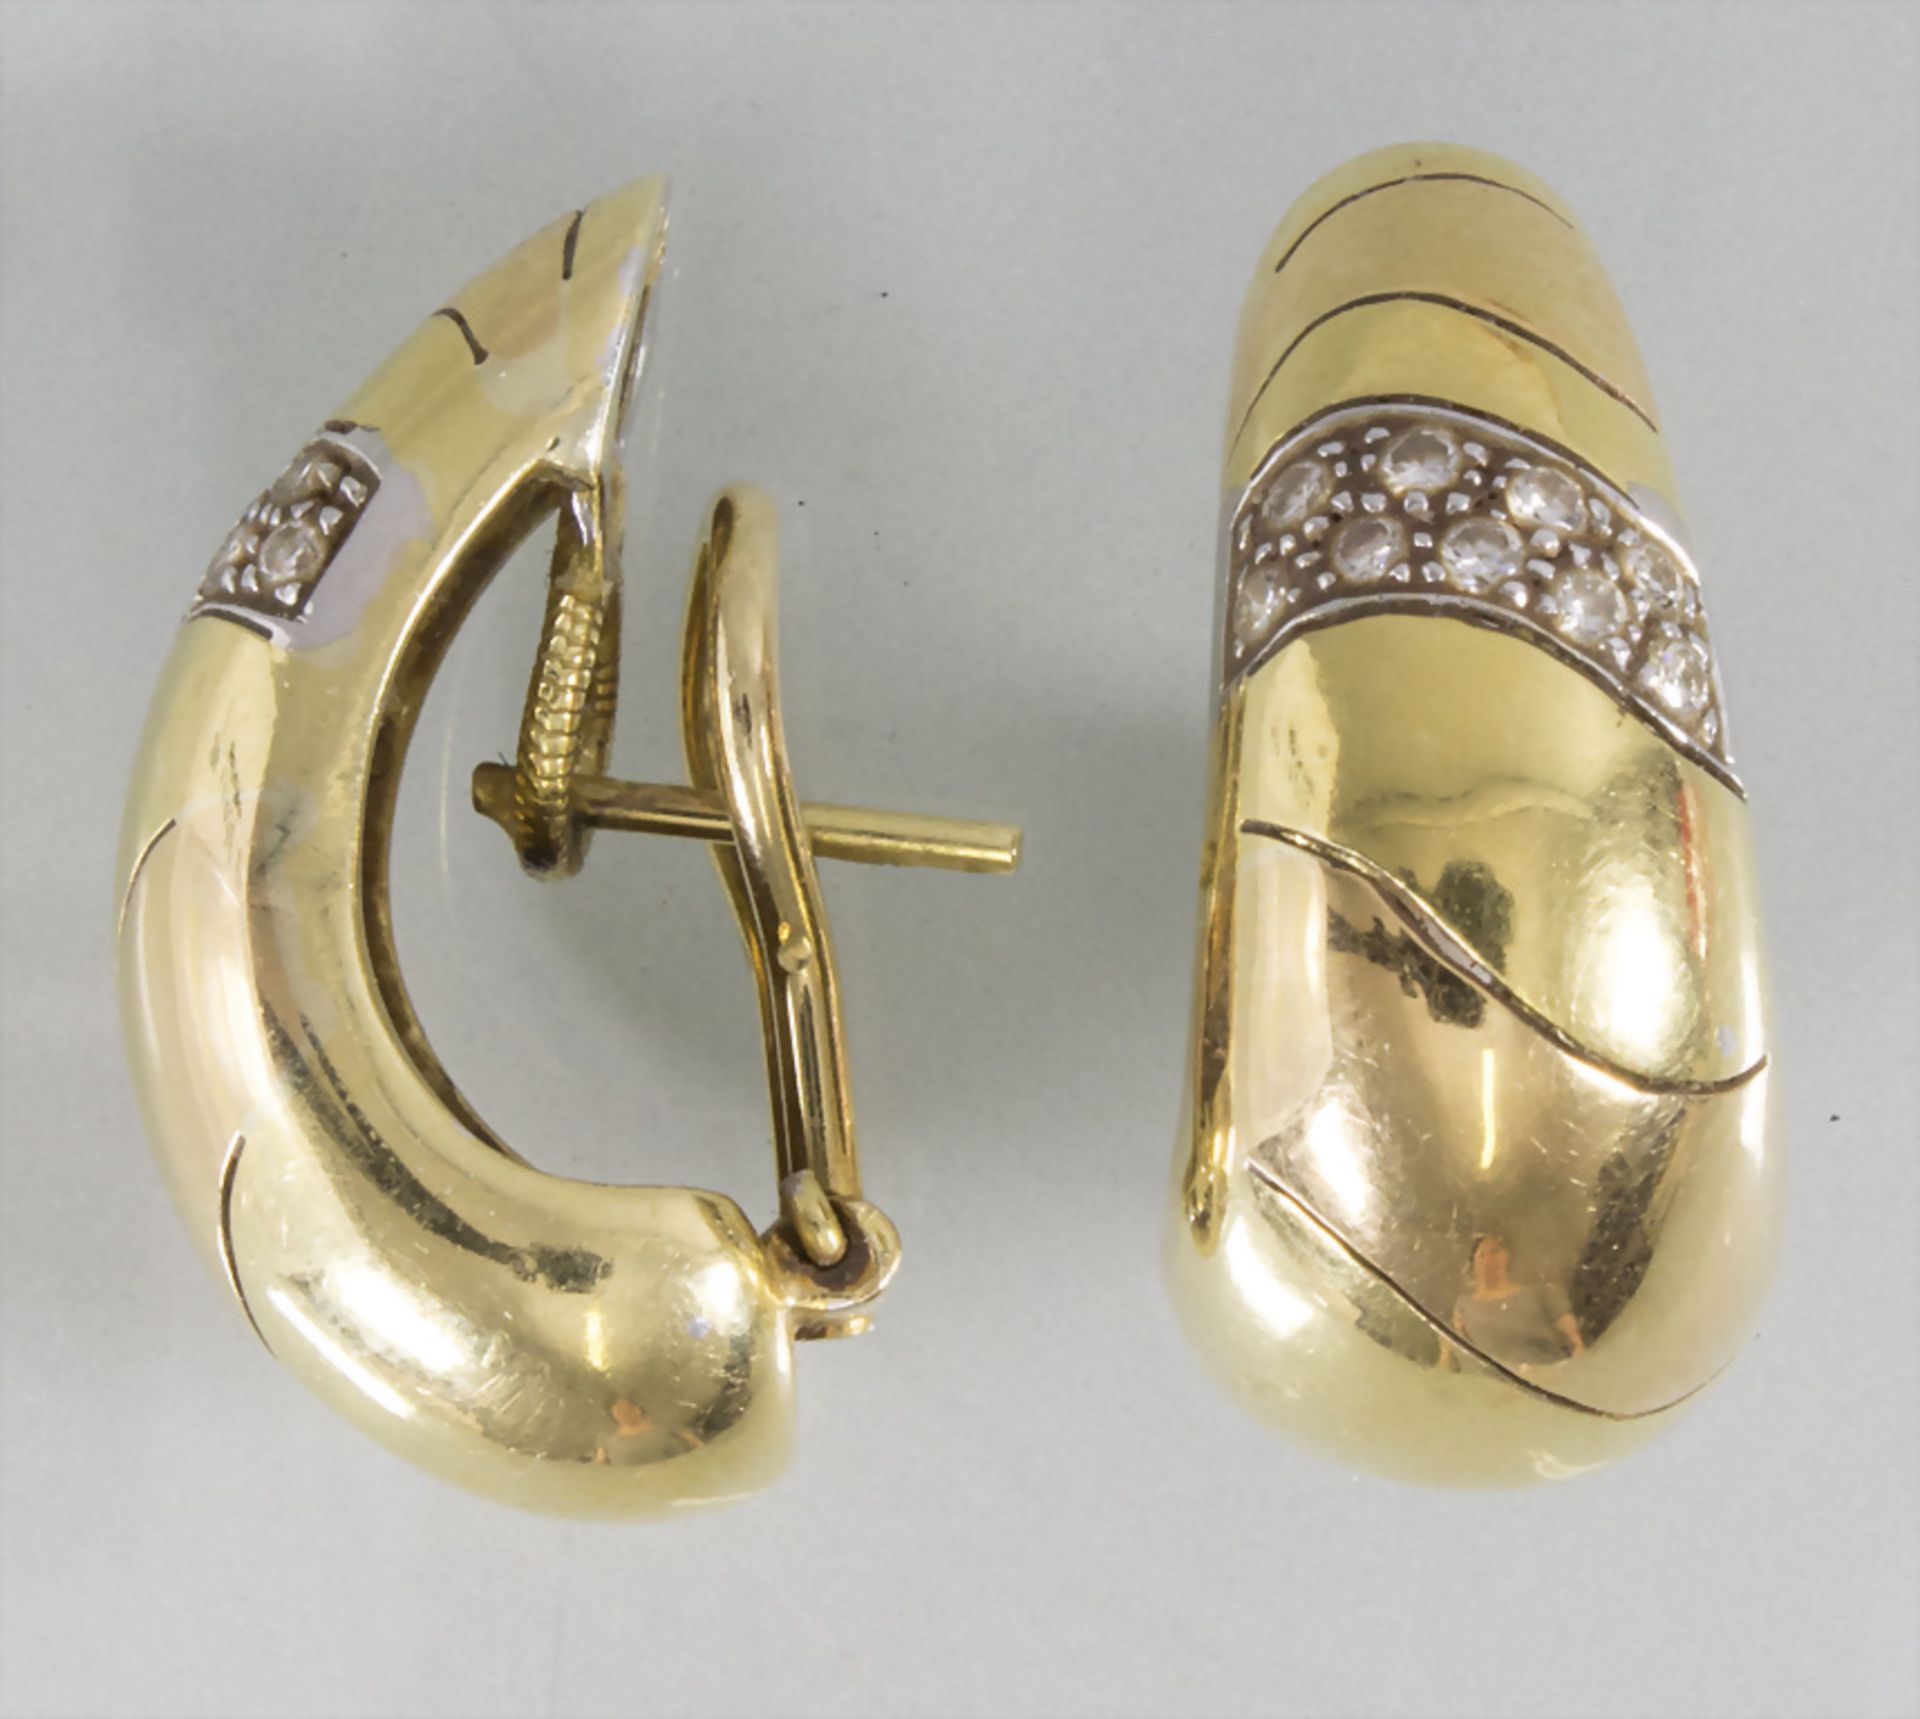 Paar Ohrringe mit Diamanten / A pair of gold earrings with diamonds